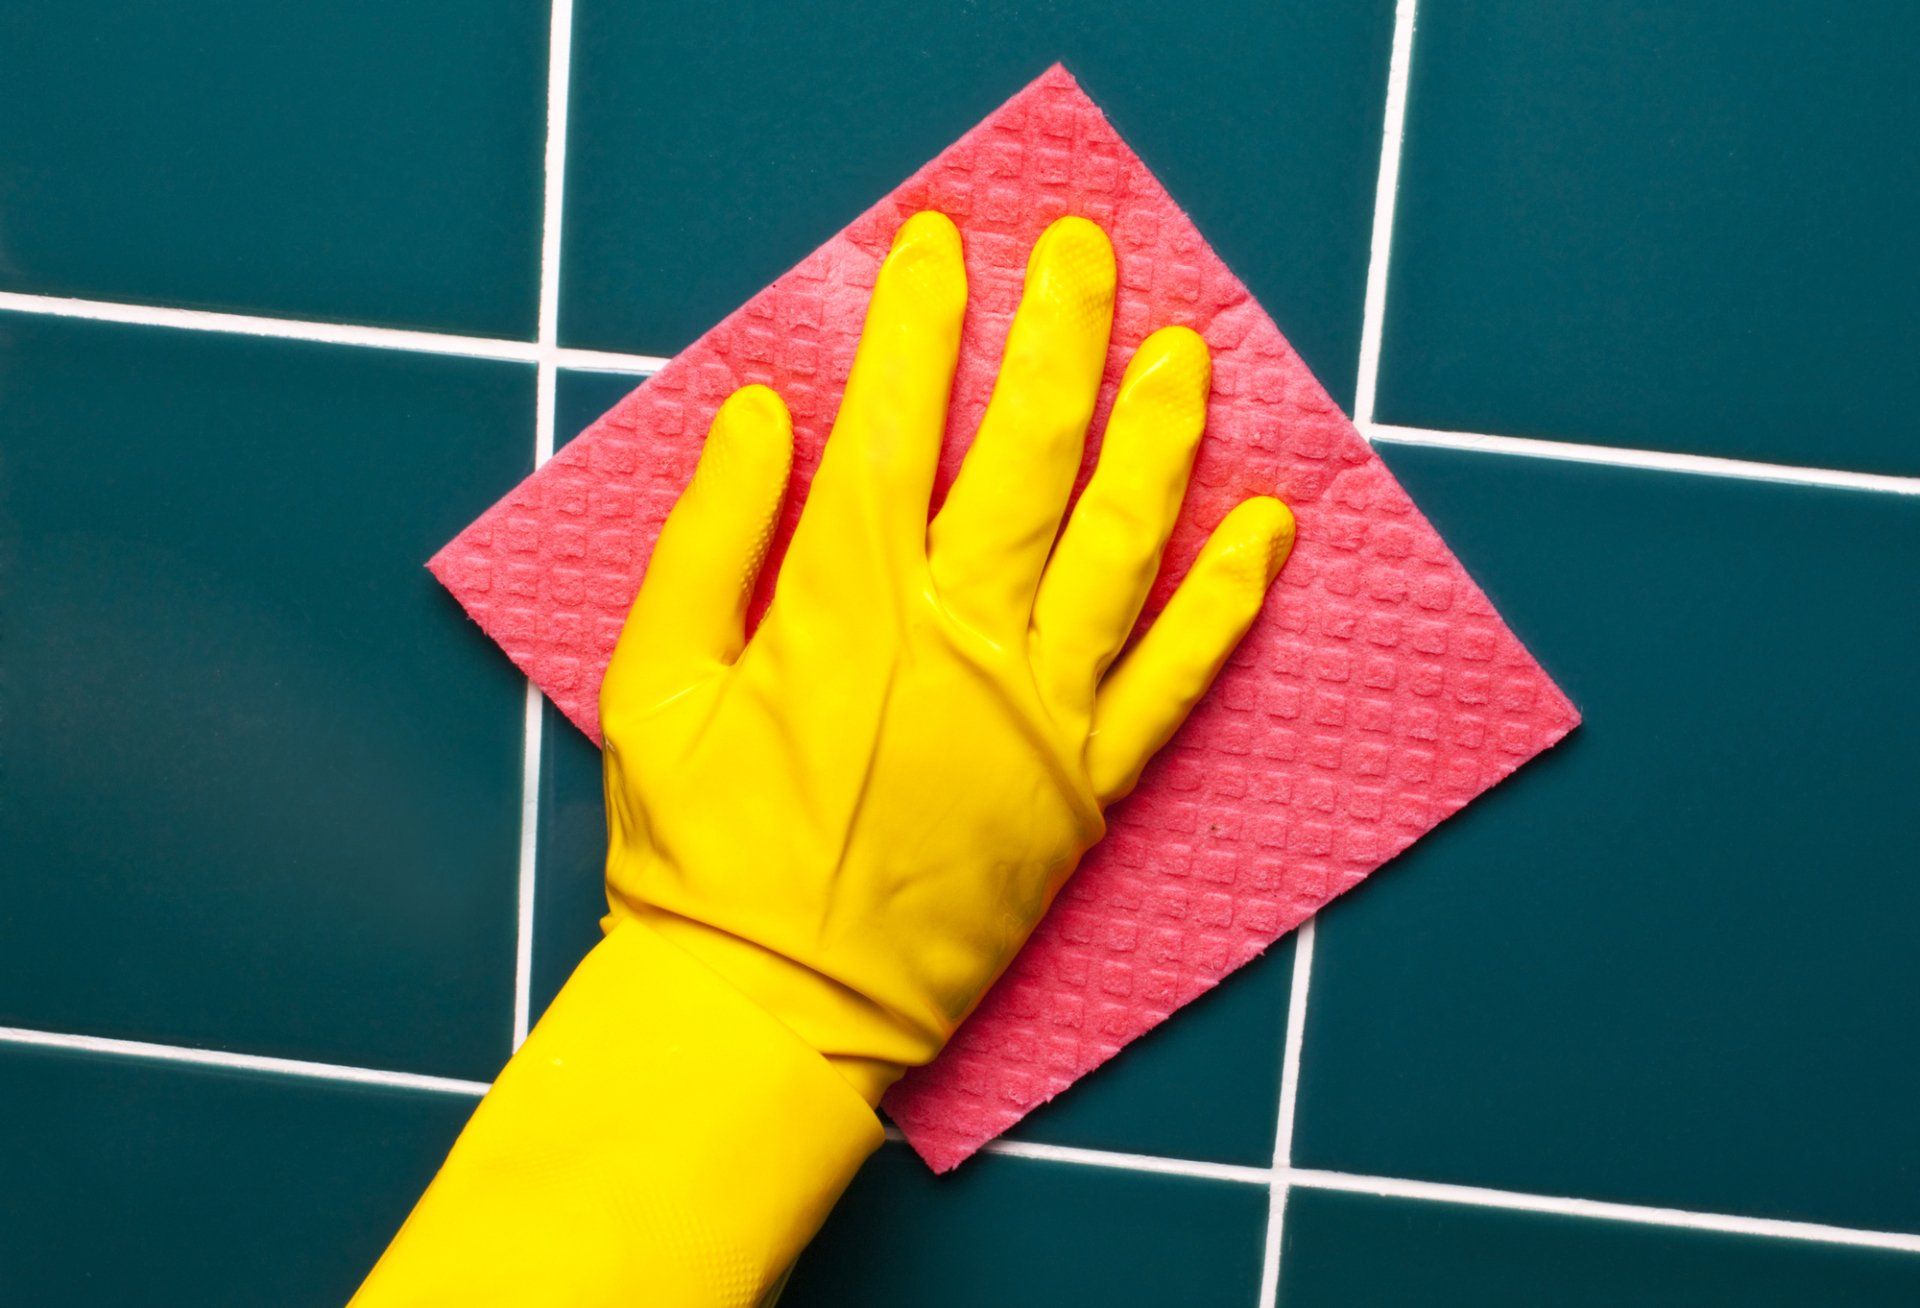 Grout Cleaning Service in Sarasota, FL | Mandy's Way